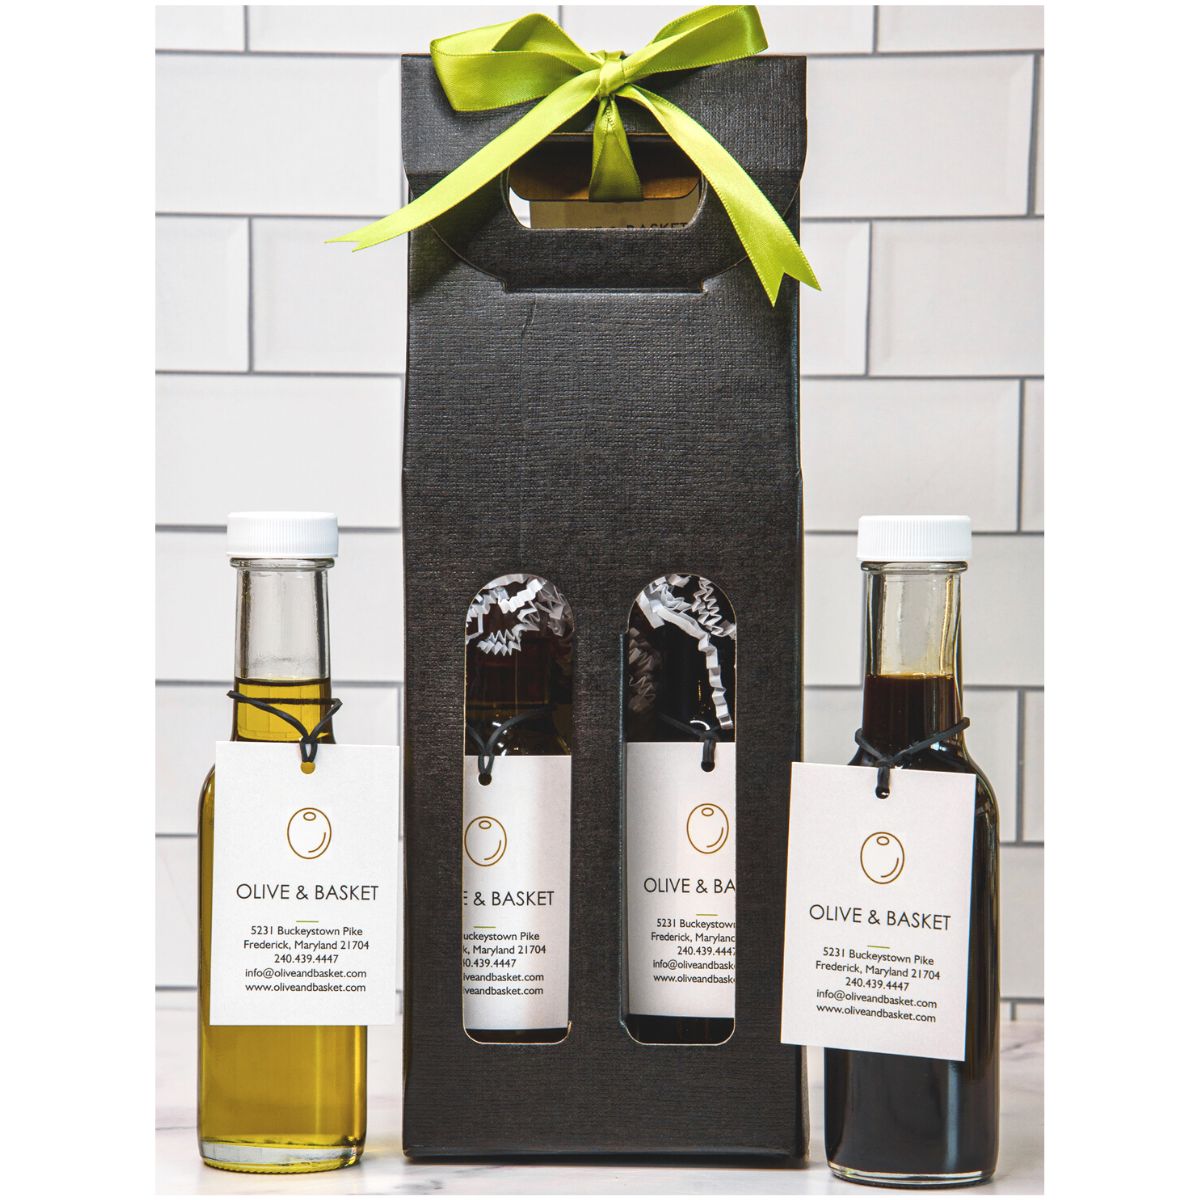 Classic Italian Duo Gift Set- Includes Traditional Balsamic Vinegar and Basil Olive Oil in a Gift Box